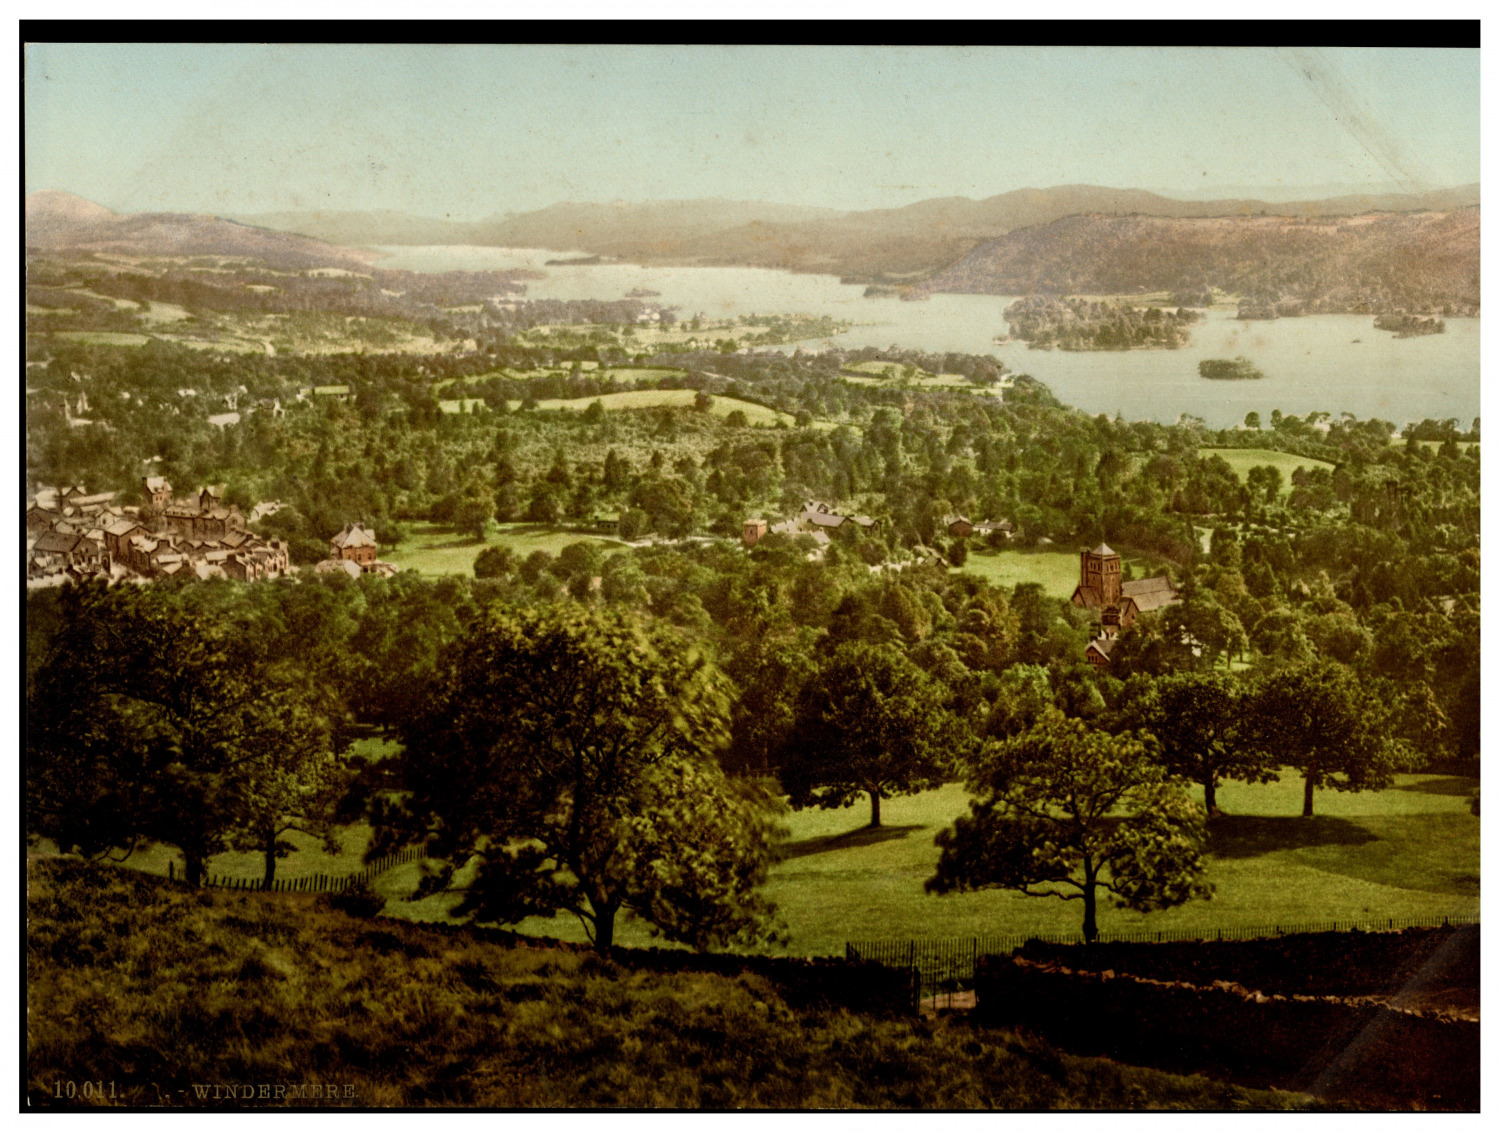 England. Lake District. Windermere, from Orrest Head. Vintage Photochrome by P